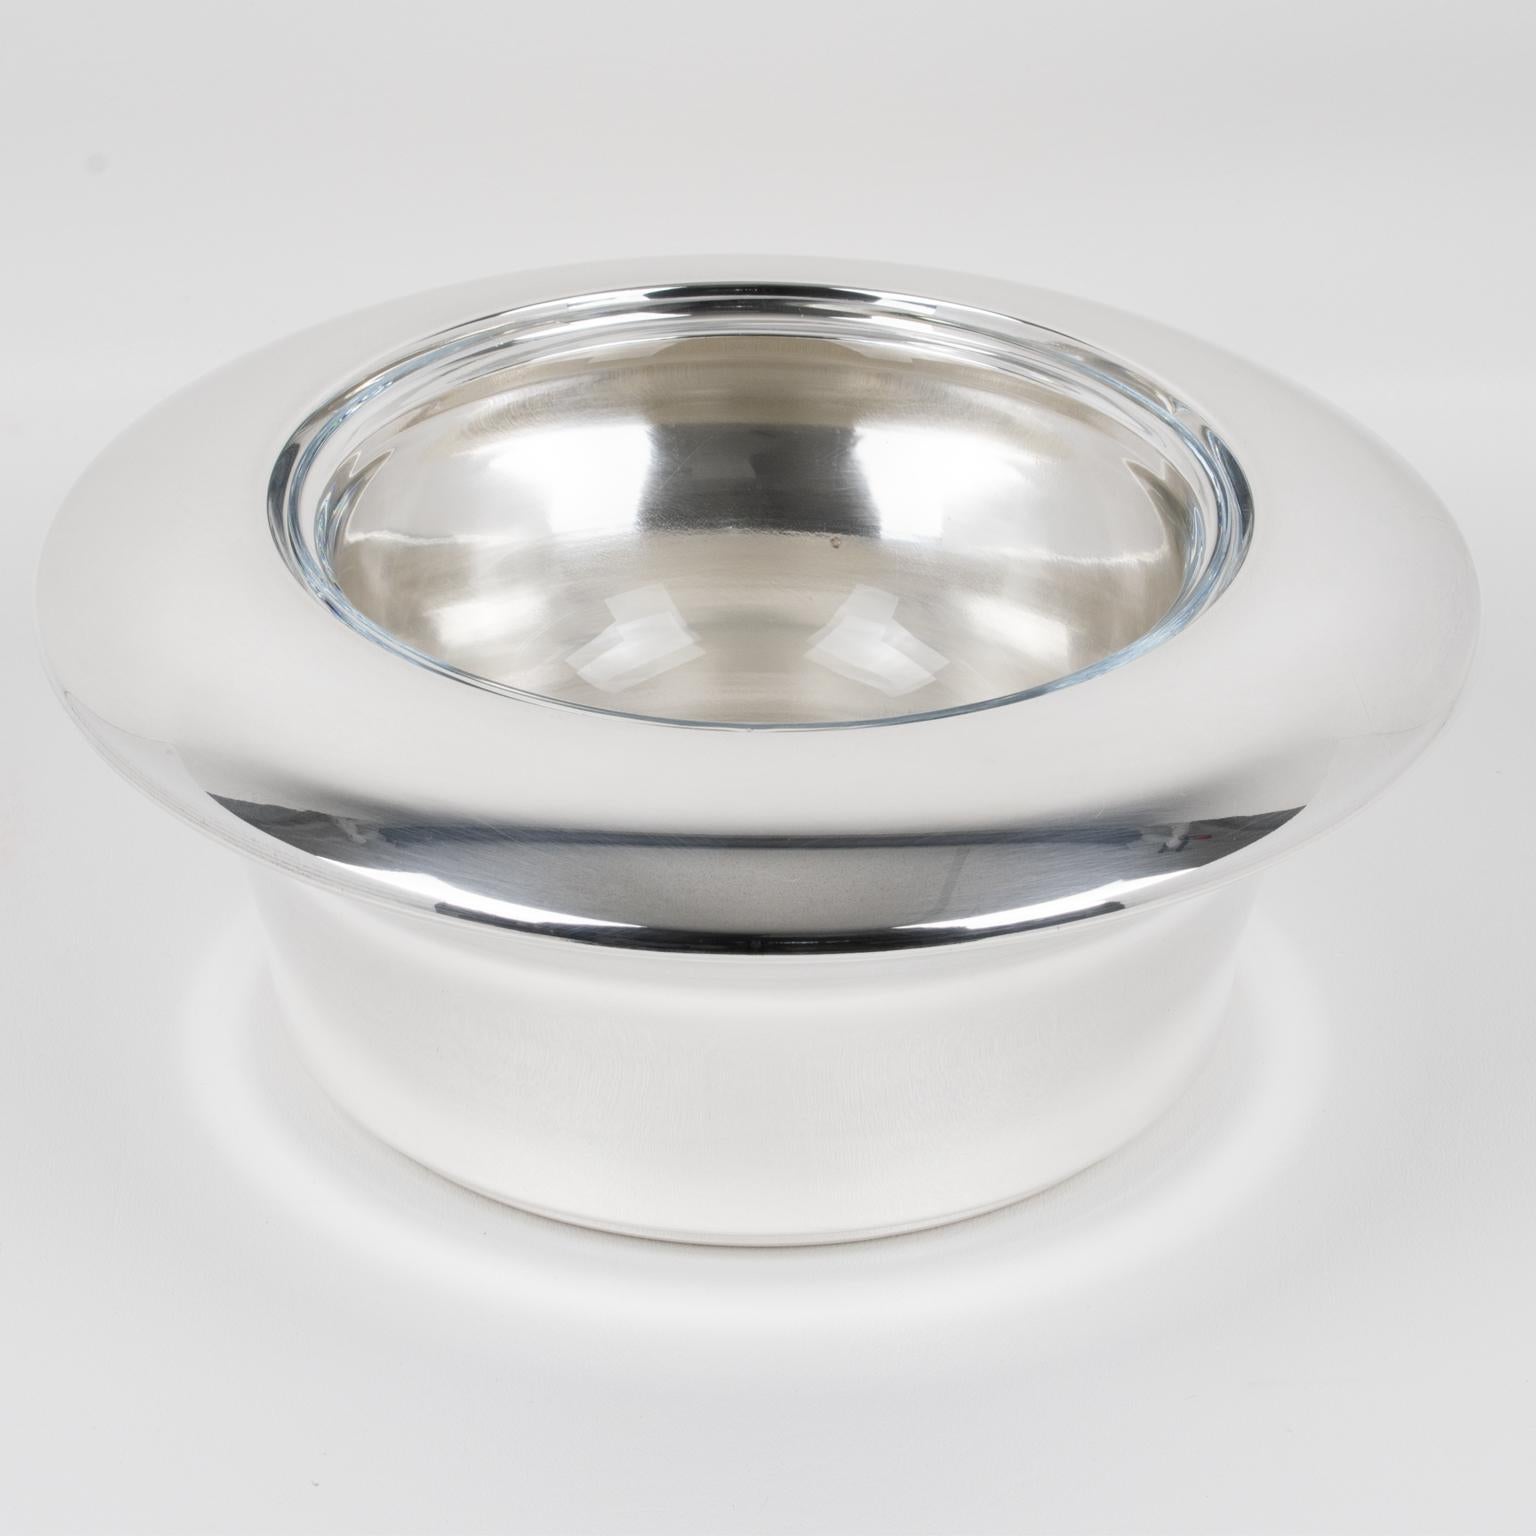 Lino Sabattini designed this modernist silver plate and crystal caviar serving bowl, dish, or chiller in the 1980s. The sophisticated design boasts a streamlined geometric shape, featuring a rounded silver-plated metal ice container with a ring lid